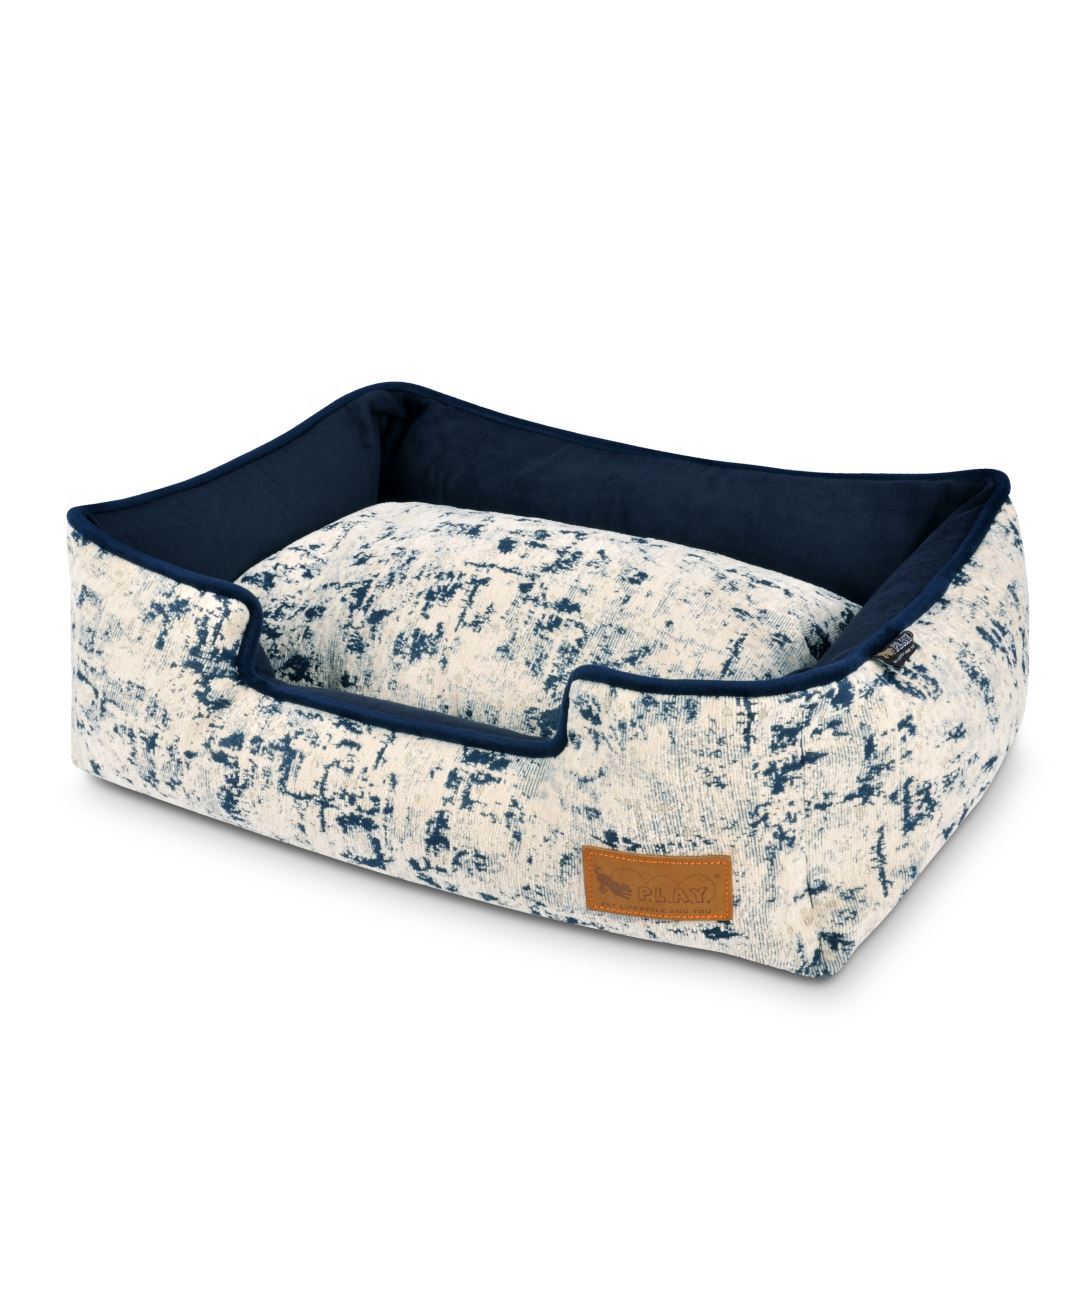 P.L.A.Y. Celestial Lounge Dog Bed (2 Colors) Dog Bed PLAY S Celestial Blue 